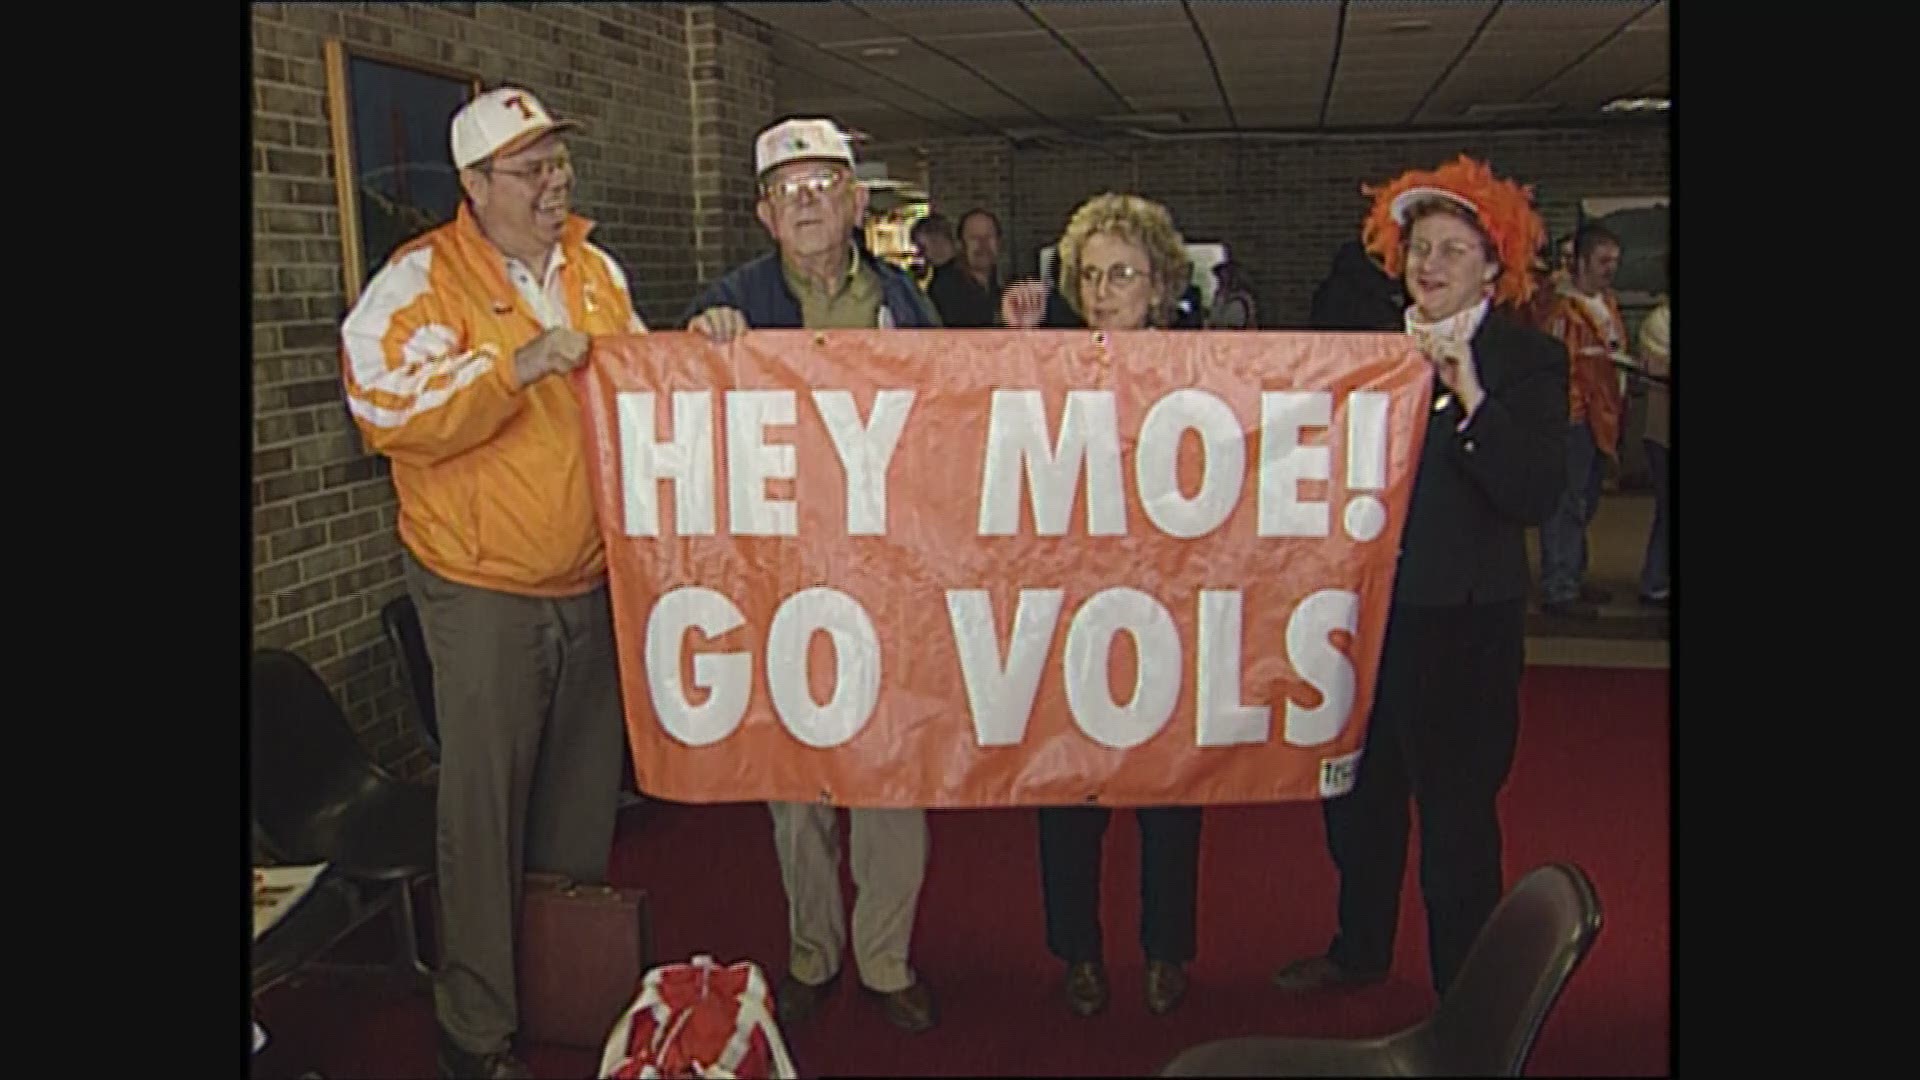 Tennessee fans were all smiles as they prepared for the journey to Tempe, Arizona to see the Vols play Florida State.